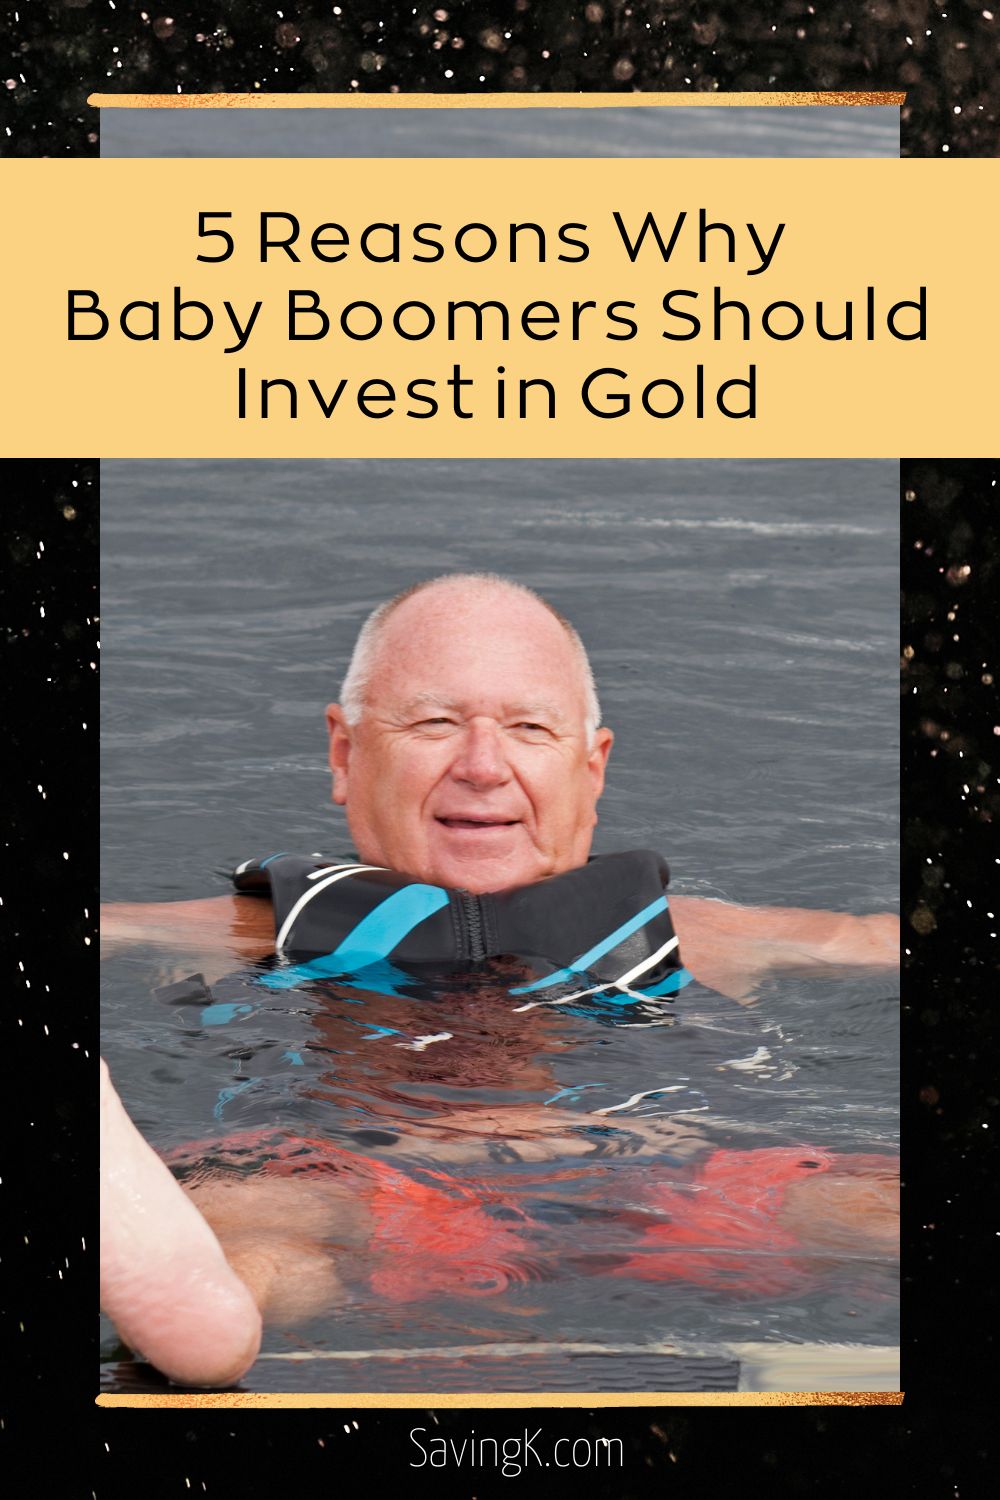 5 Reasons Why Baby Boomers Should Invest in Gold